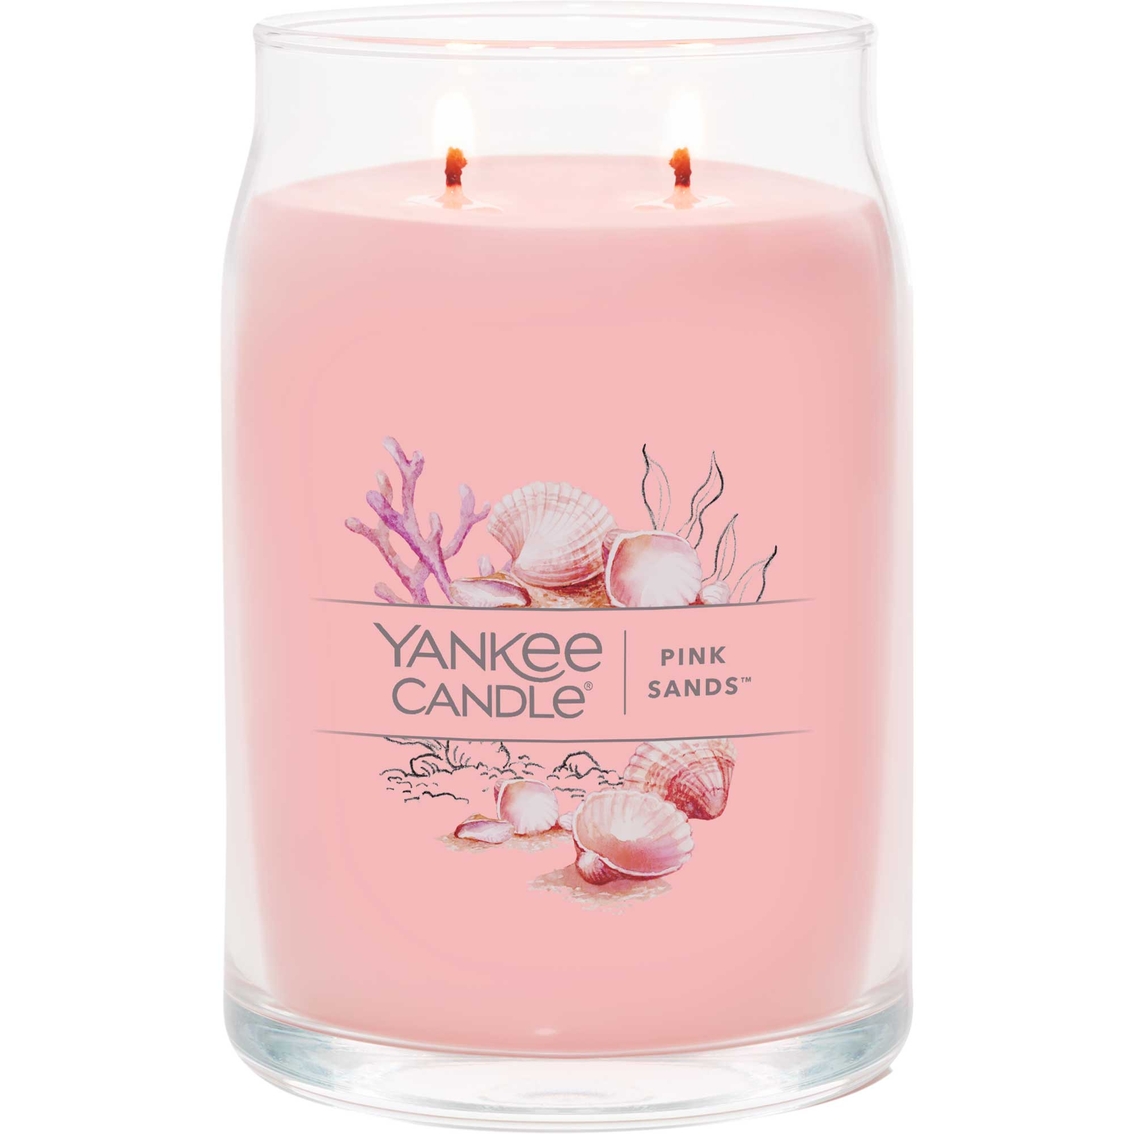 Yankee Candle Pink Sands Signature Large Jar Candle - Image 2 of 2